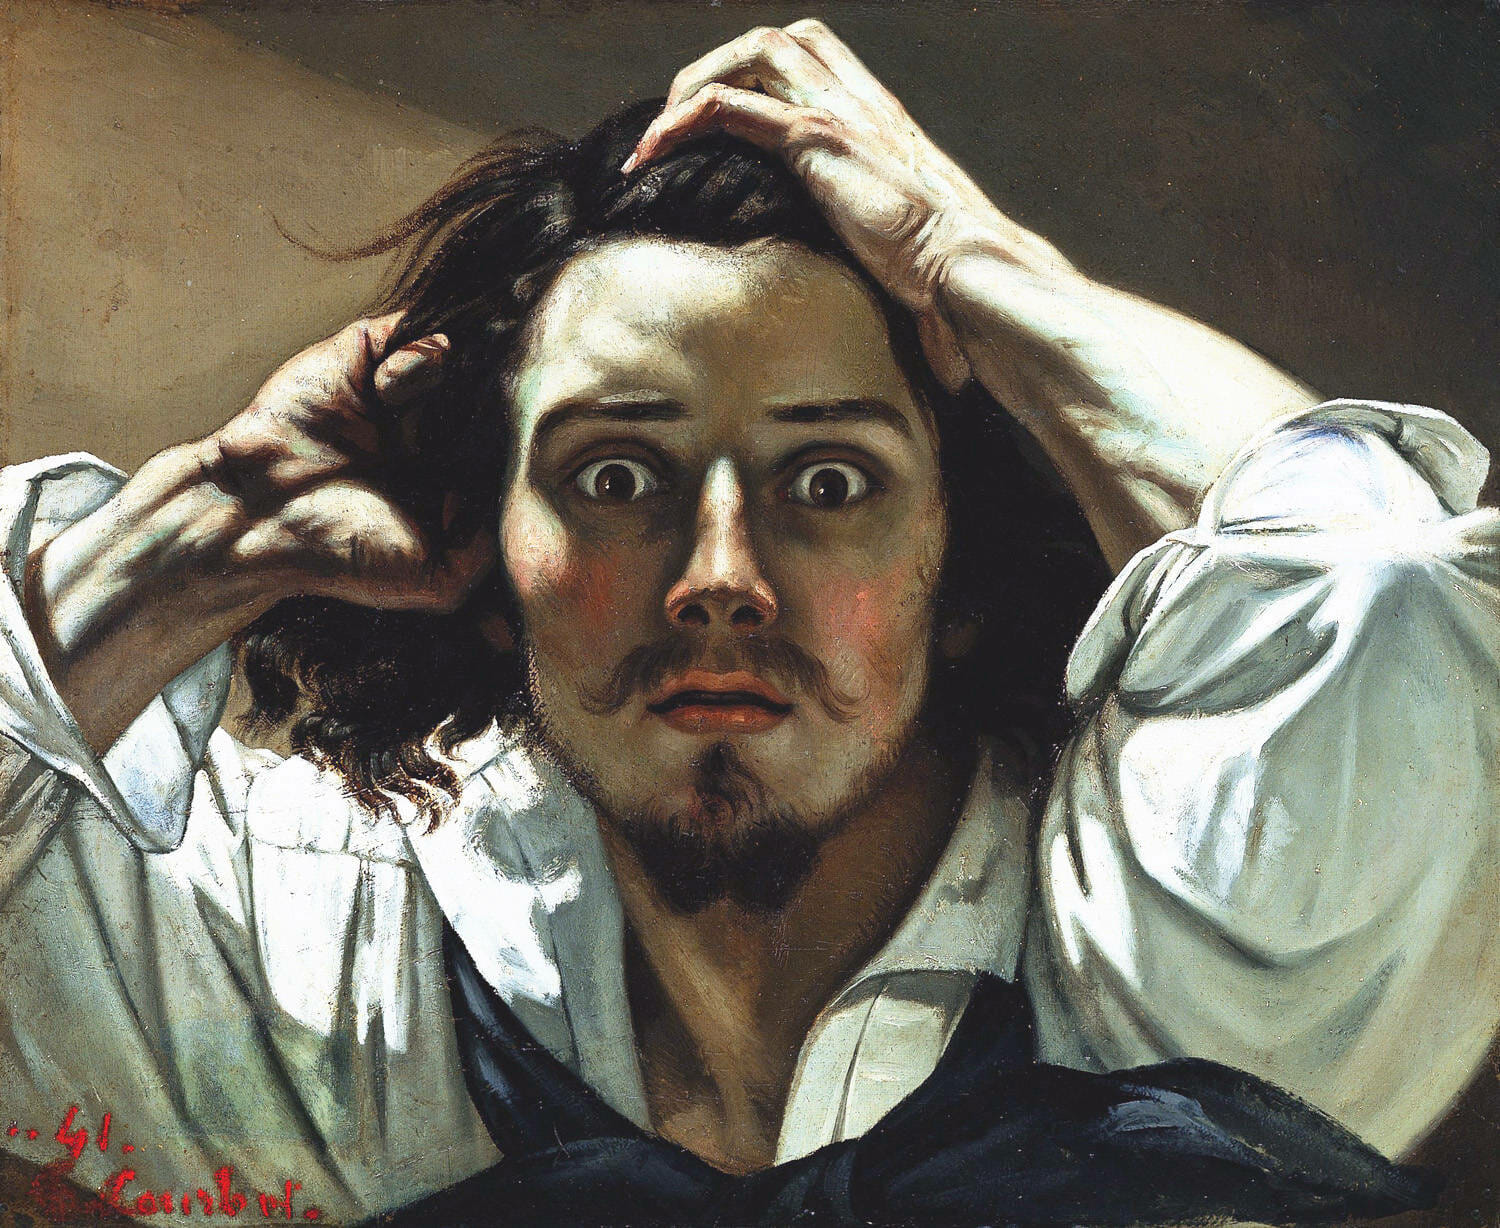 Courbet and the self-portrait of the solitary